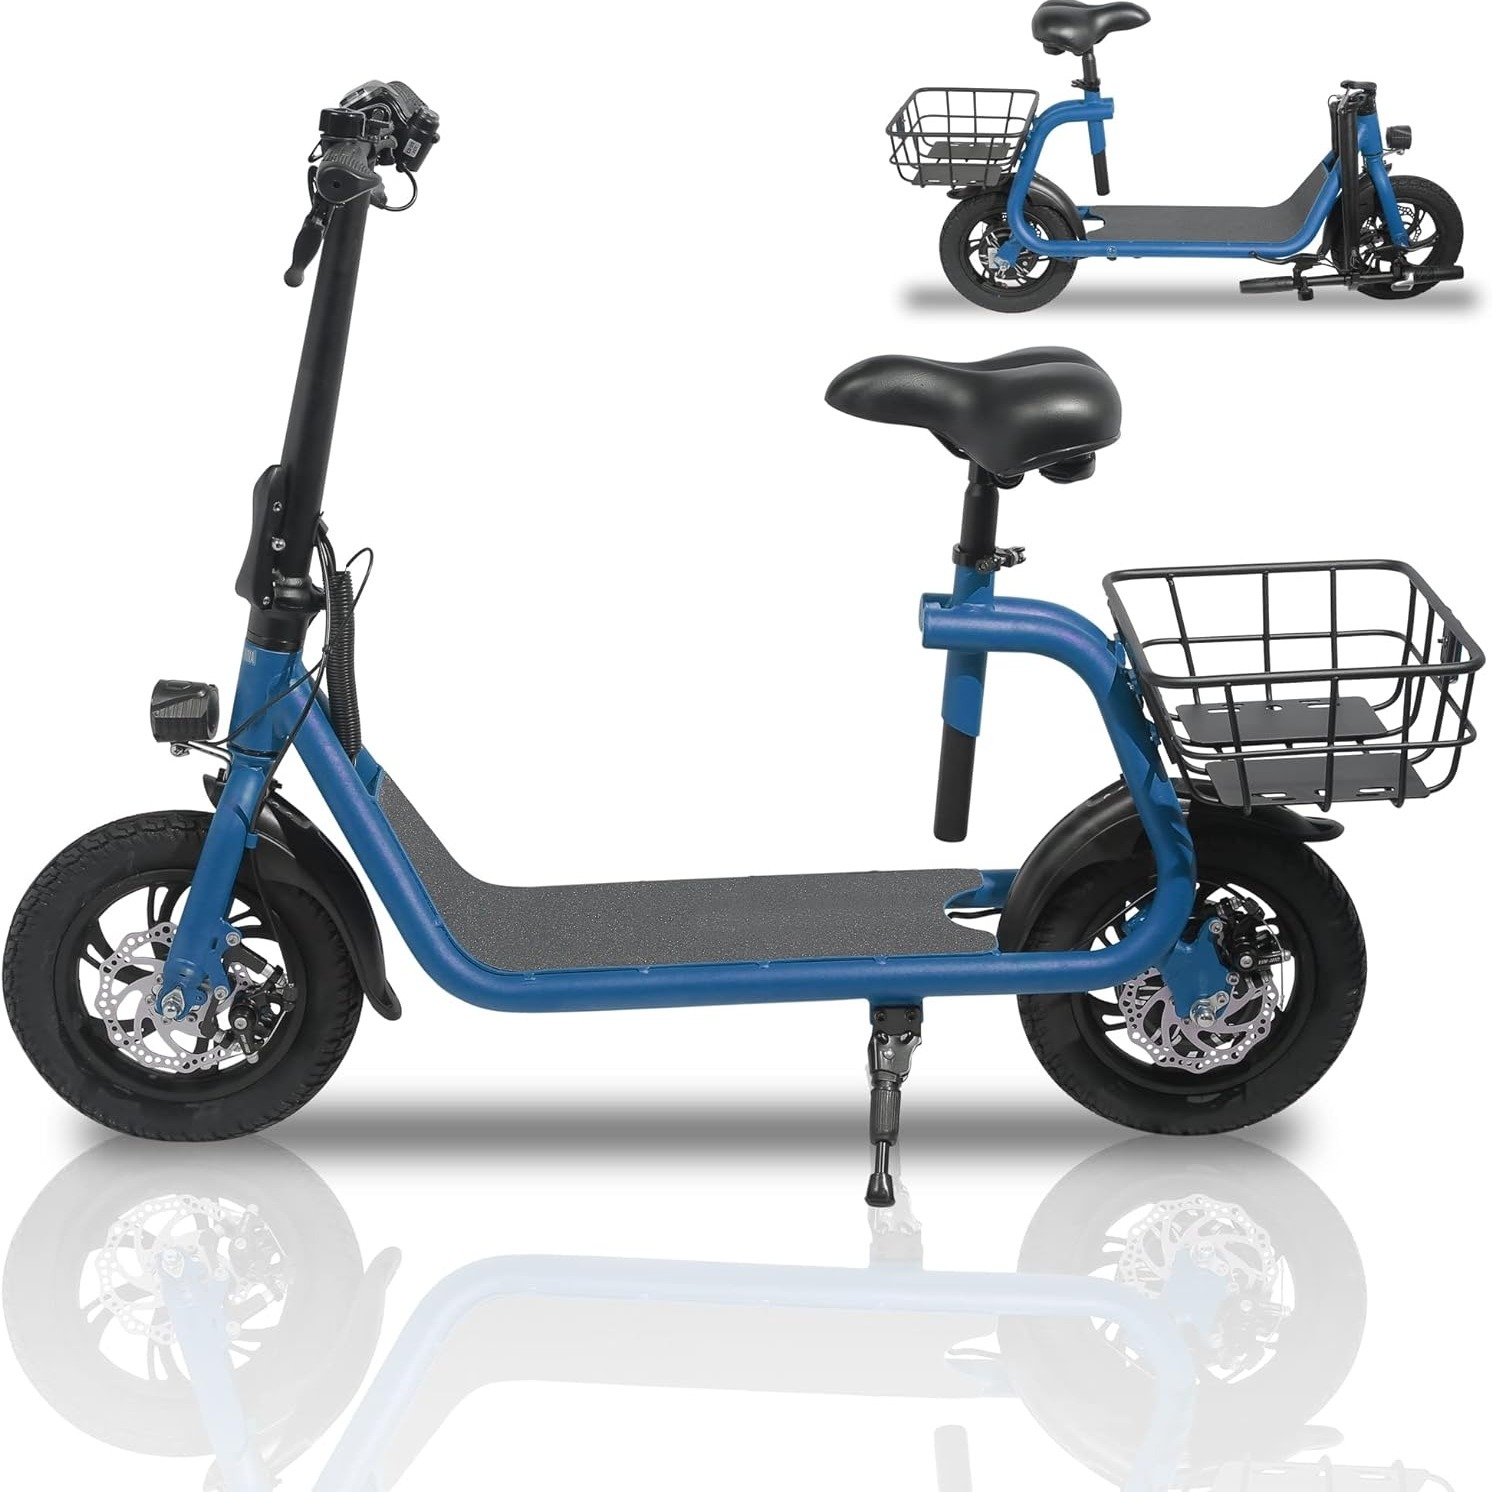 

R1 Electric Scooter For Adults Scooter With Seat For Adult Foldable Electric Mopeds With 450w Brushless Motor Commuter 265lbs Max Load